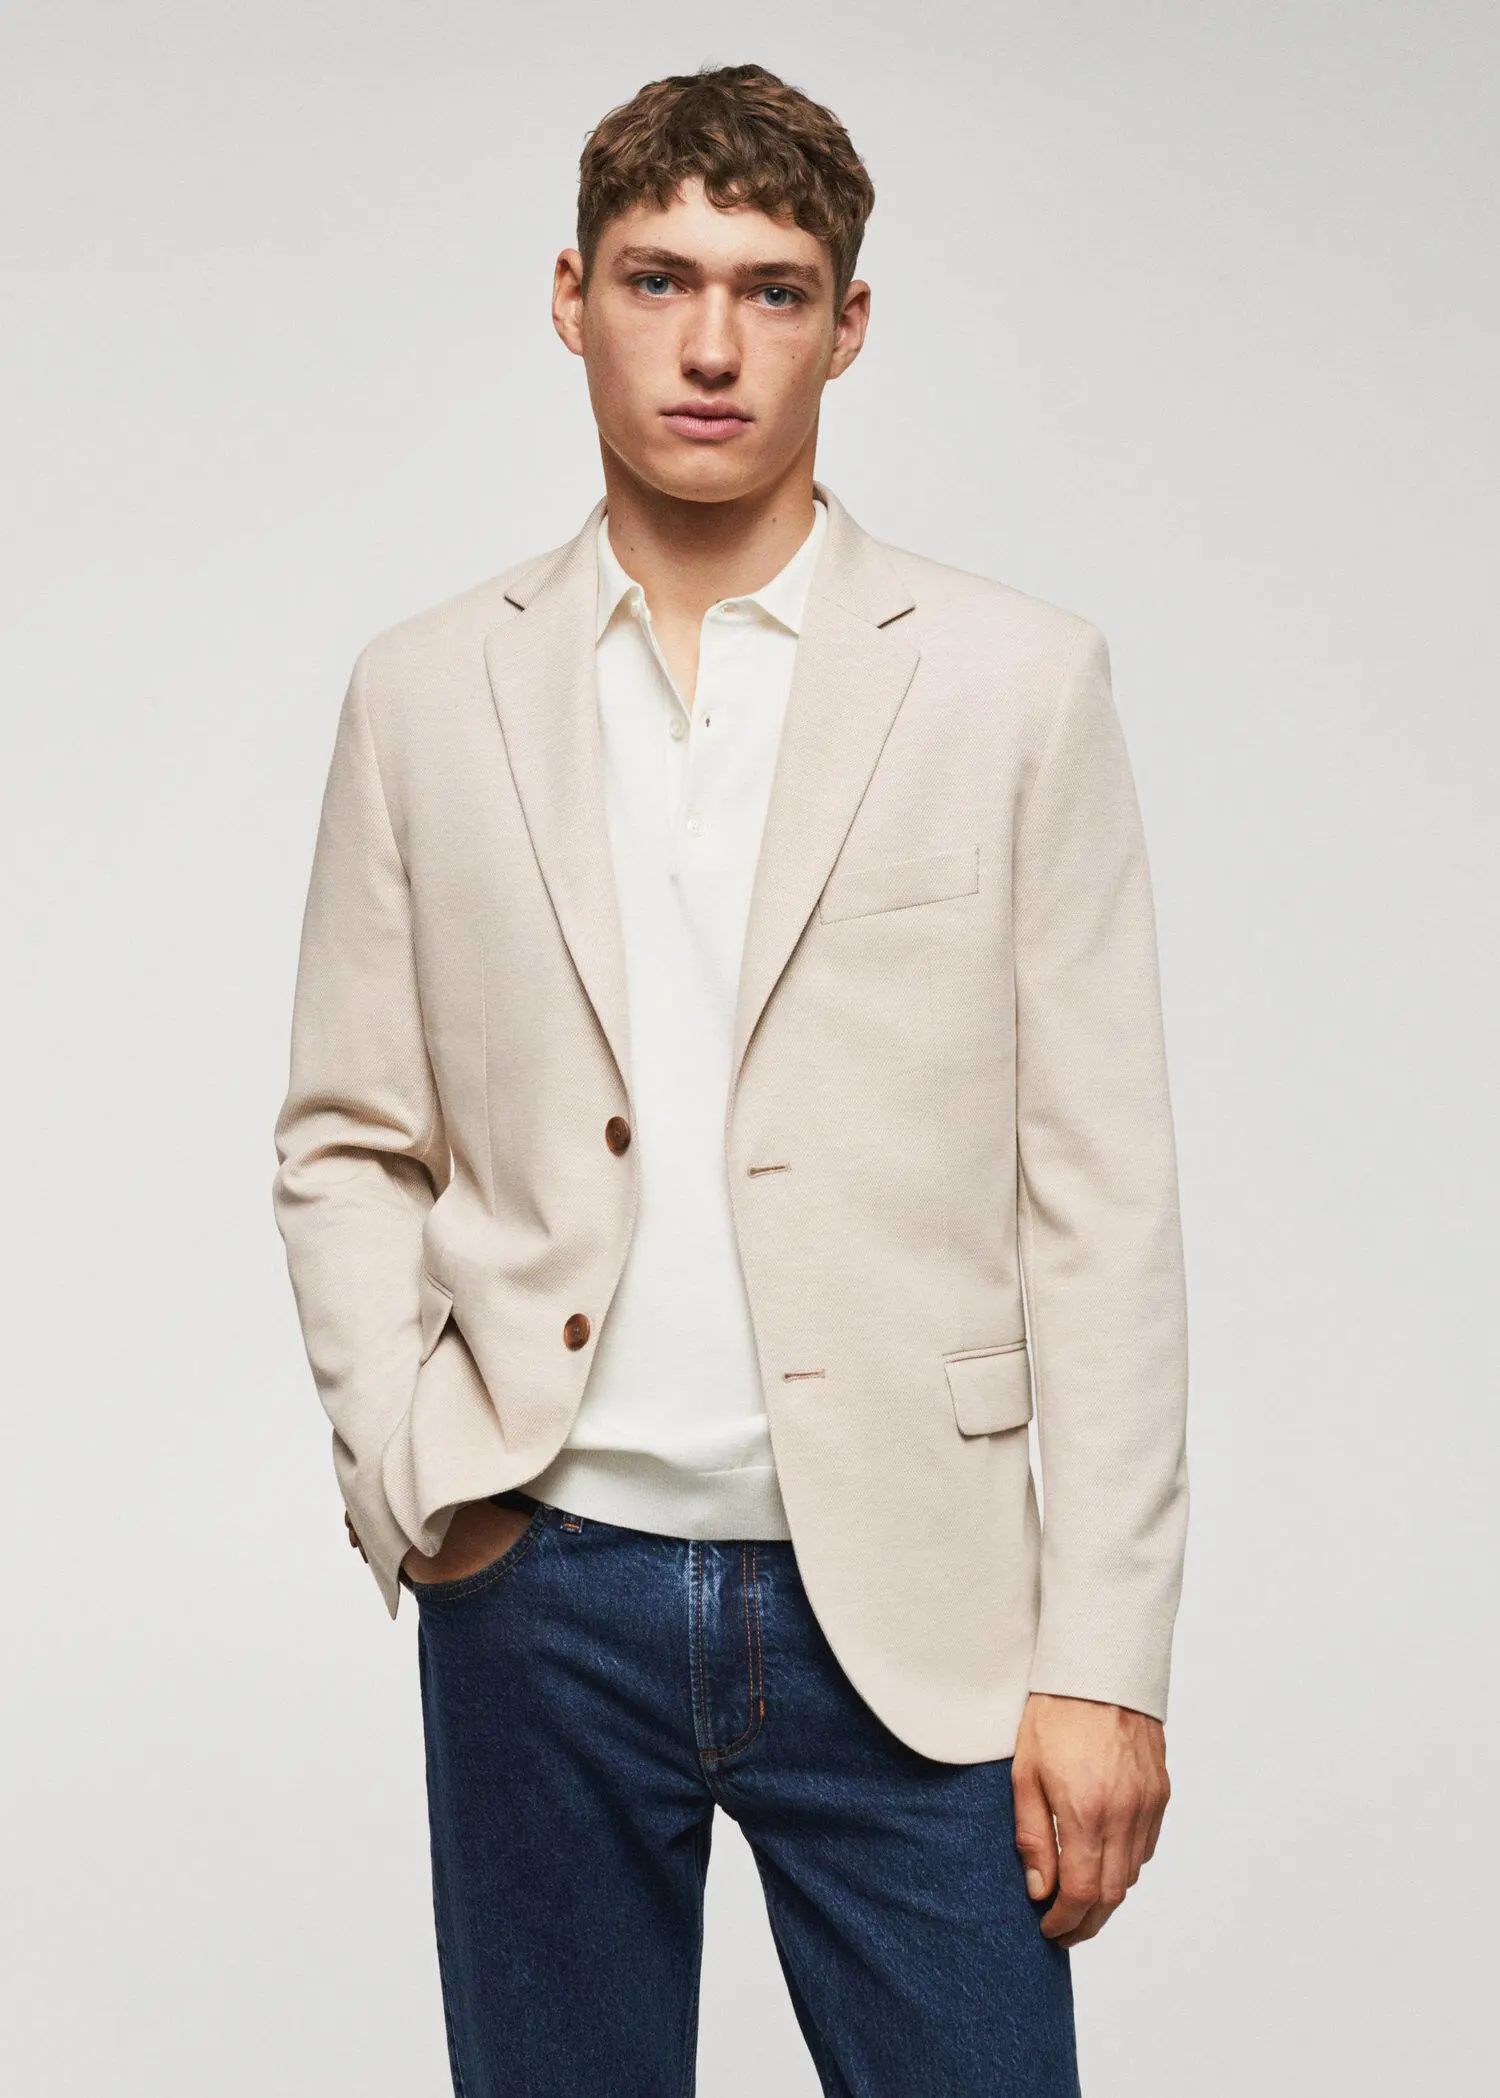 Mango Slim fit microstructure blazer. a man wearing a white shirt and a beige jacket. 